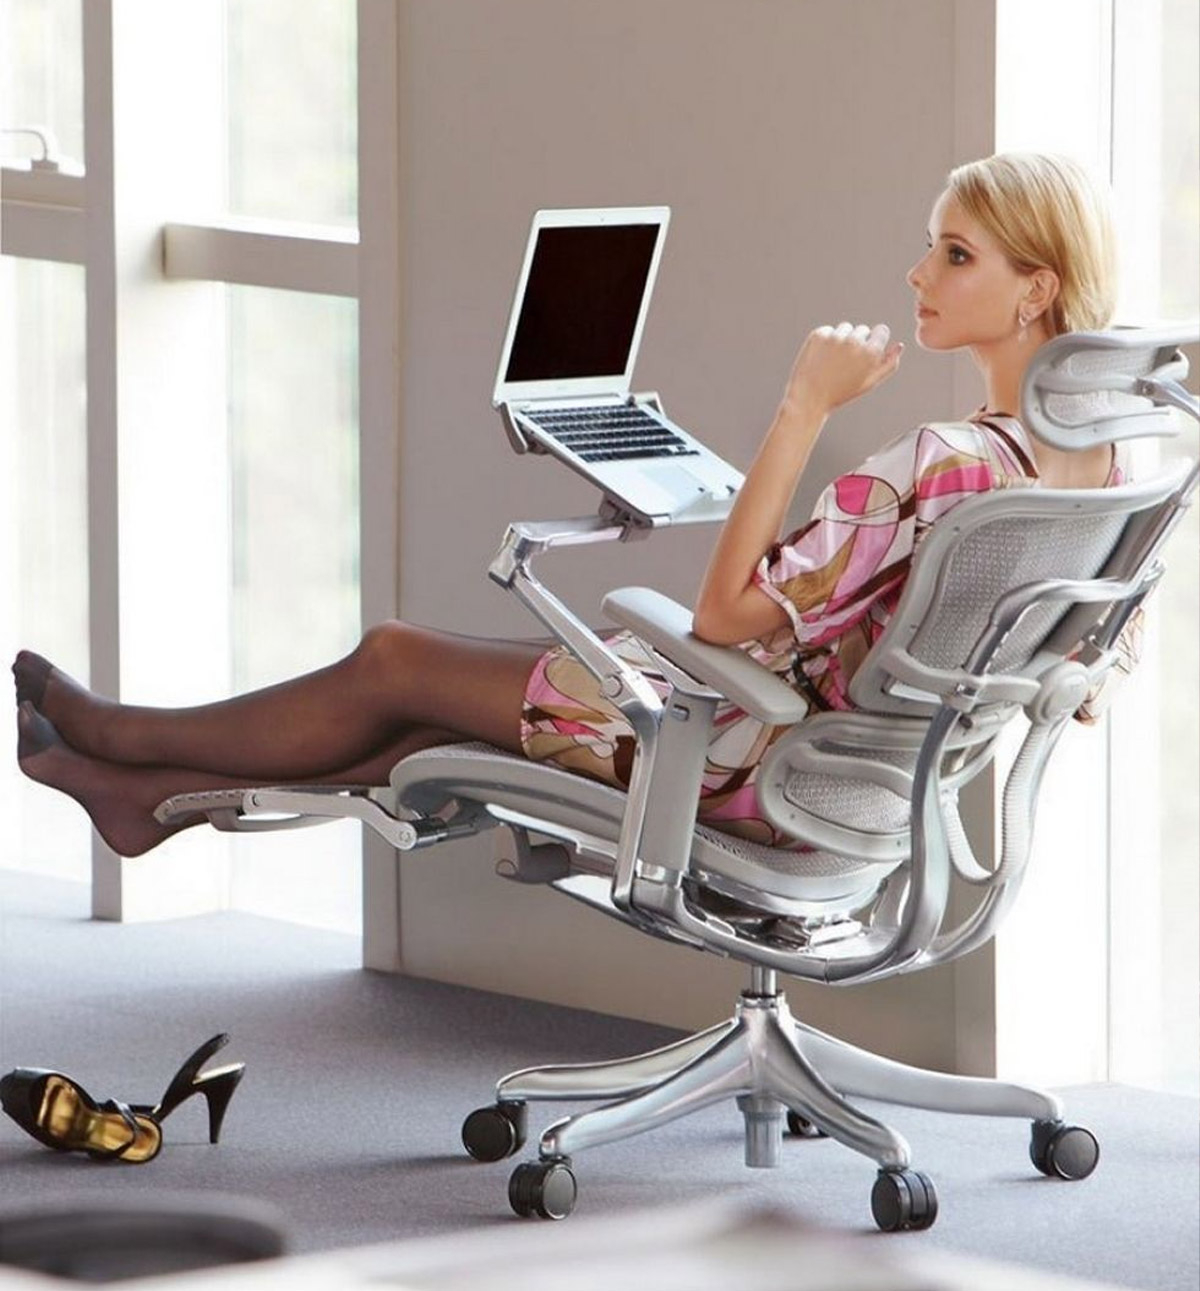 Orthopedic office chairs 2